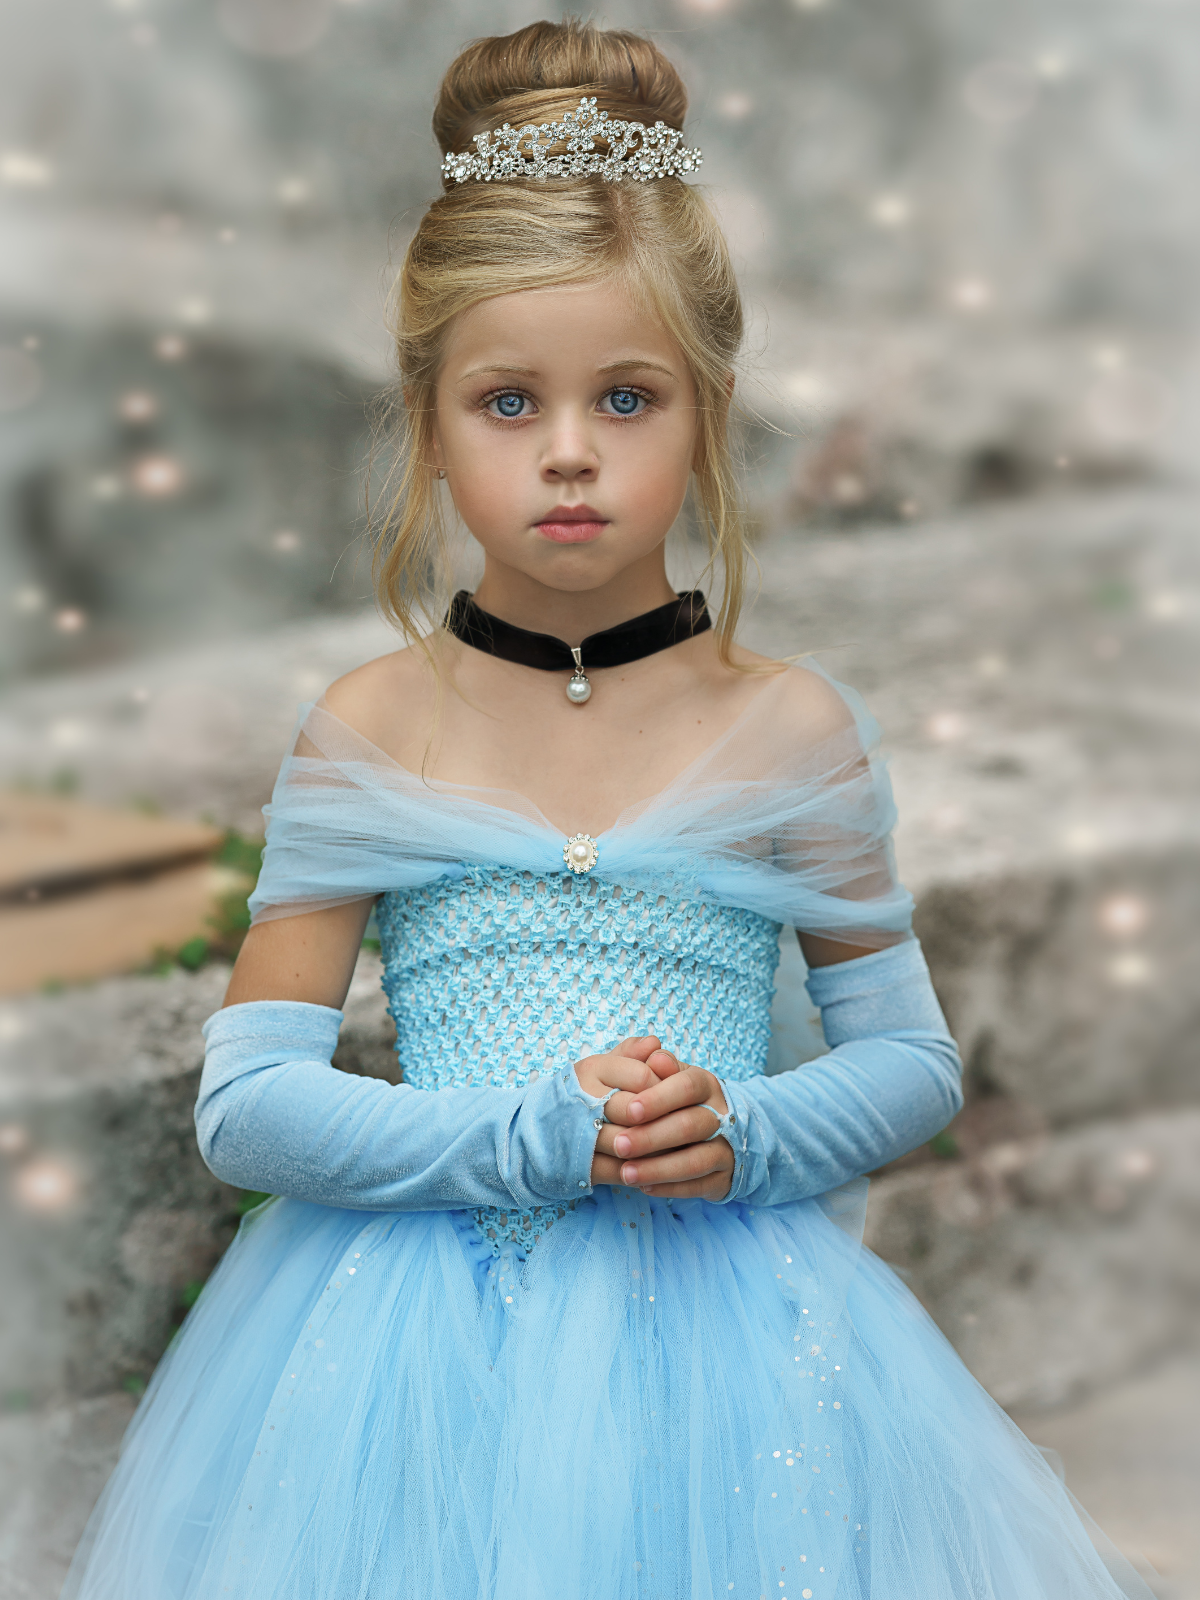 Ecparty Princess Costumes Dress for Your Little India | Ubuy